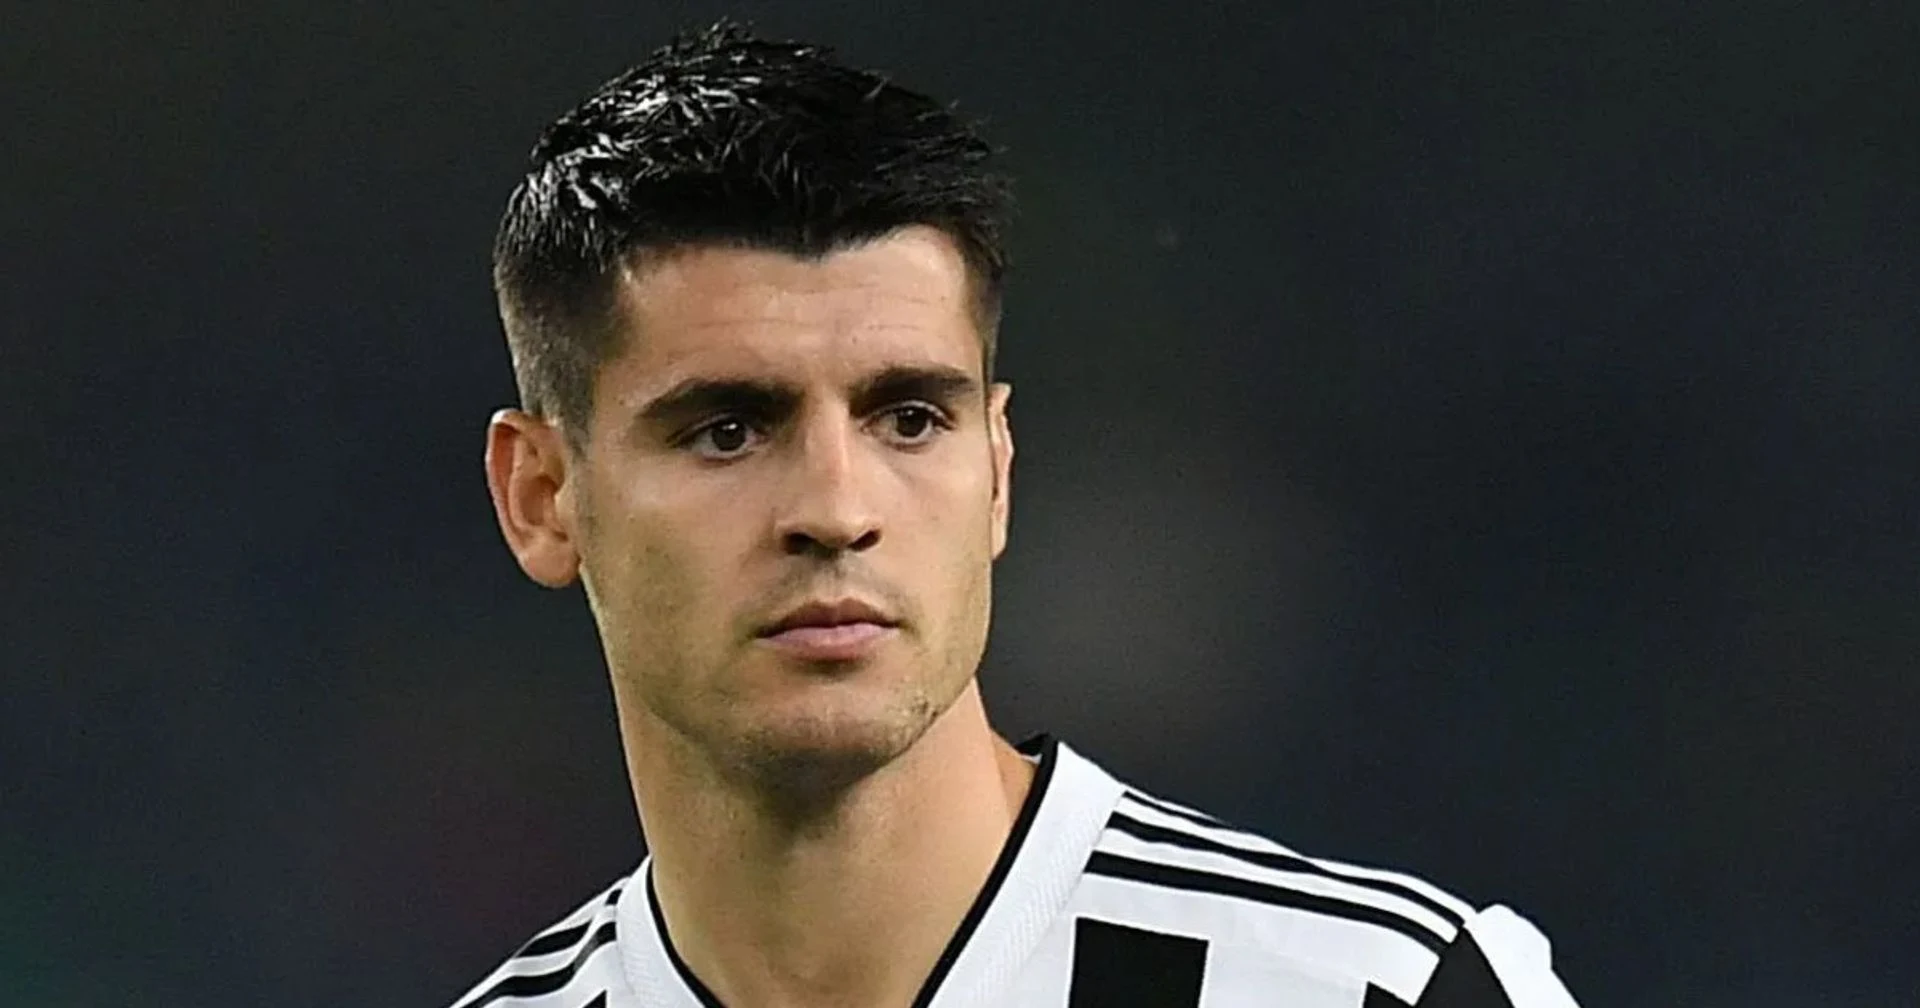 Morata transfer to Barca complicated due to multiple reasons